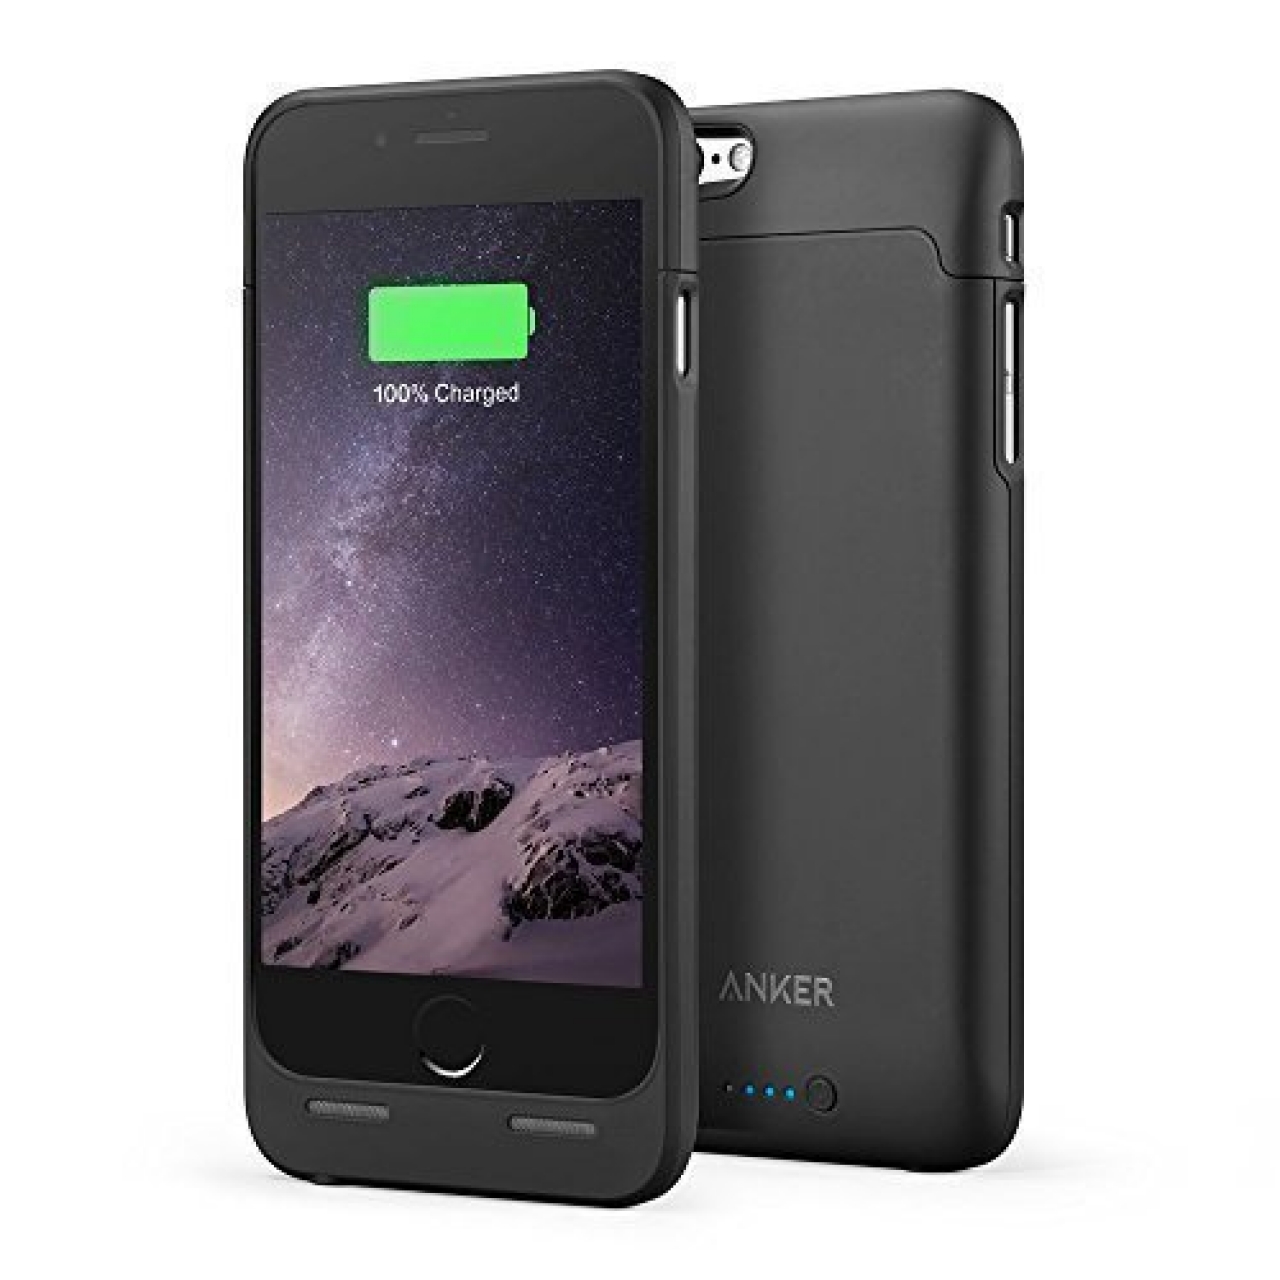 Rusteloos Slim schot Anker Ultra Slim 2850mAh Extended Battery Case for iPhone 6 / 6s -  iClarified